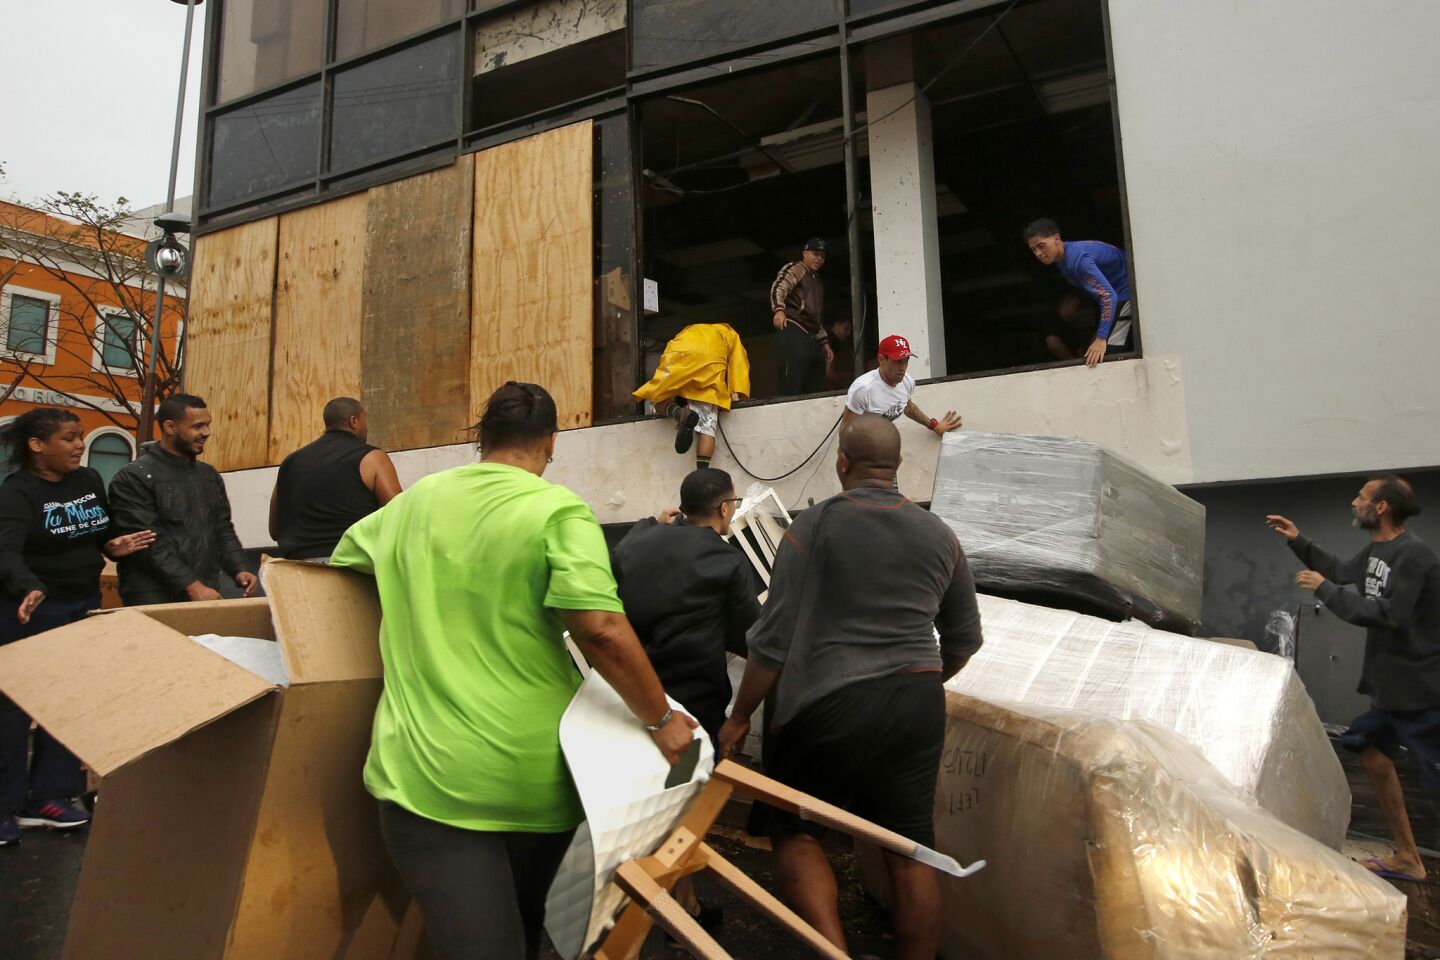 People loot a furniture store in a section of Old San Juan after Maria damaged buildings.